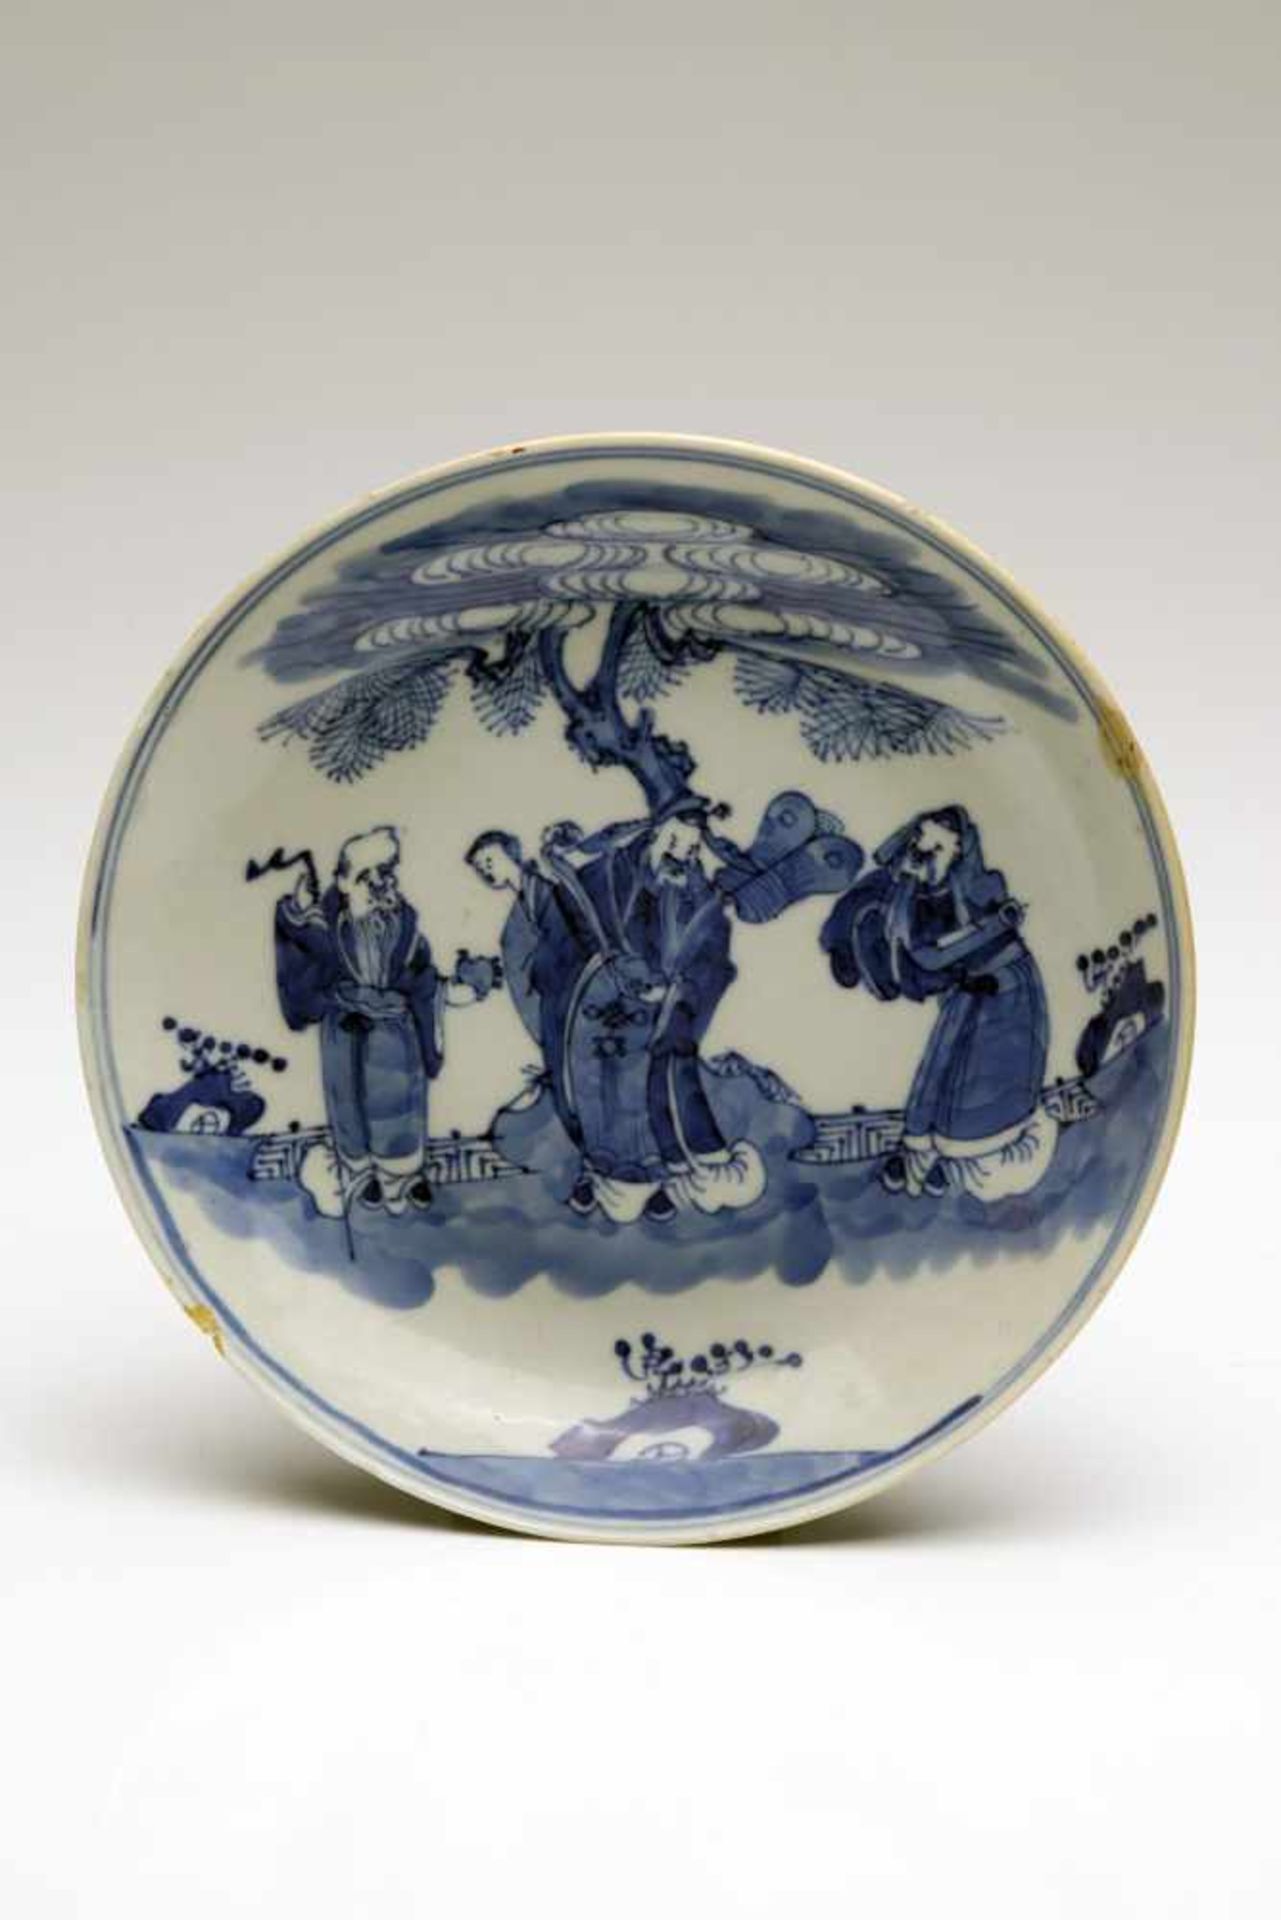 PLATEporcelainChina, 16th century,Size: 4 cm x 19 cmBlue and white porcelain plate with depiction of